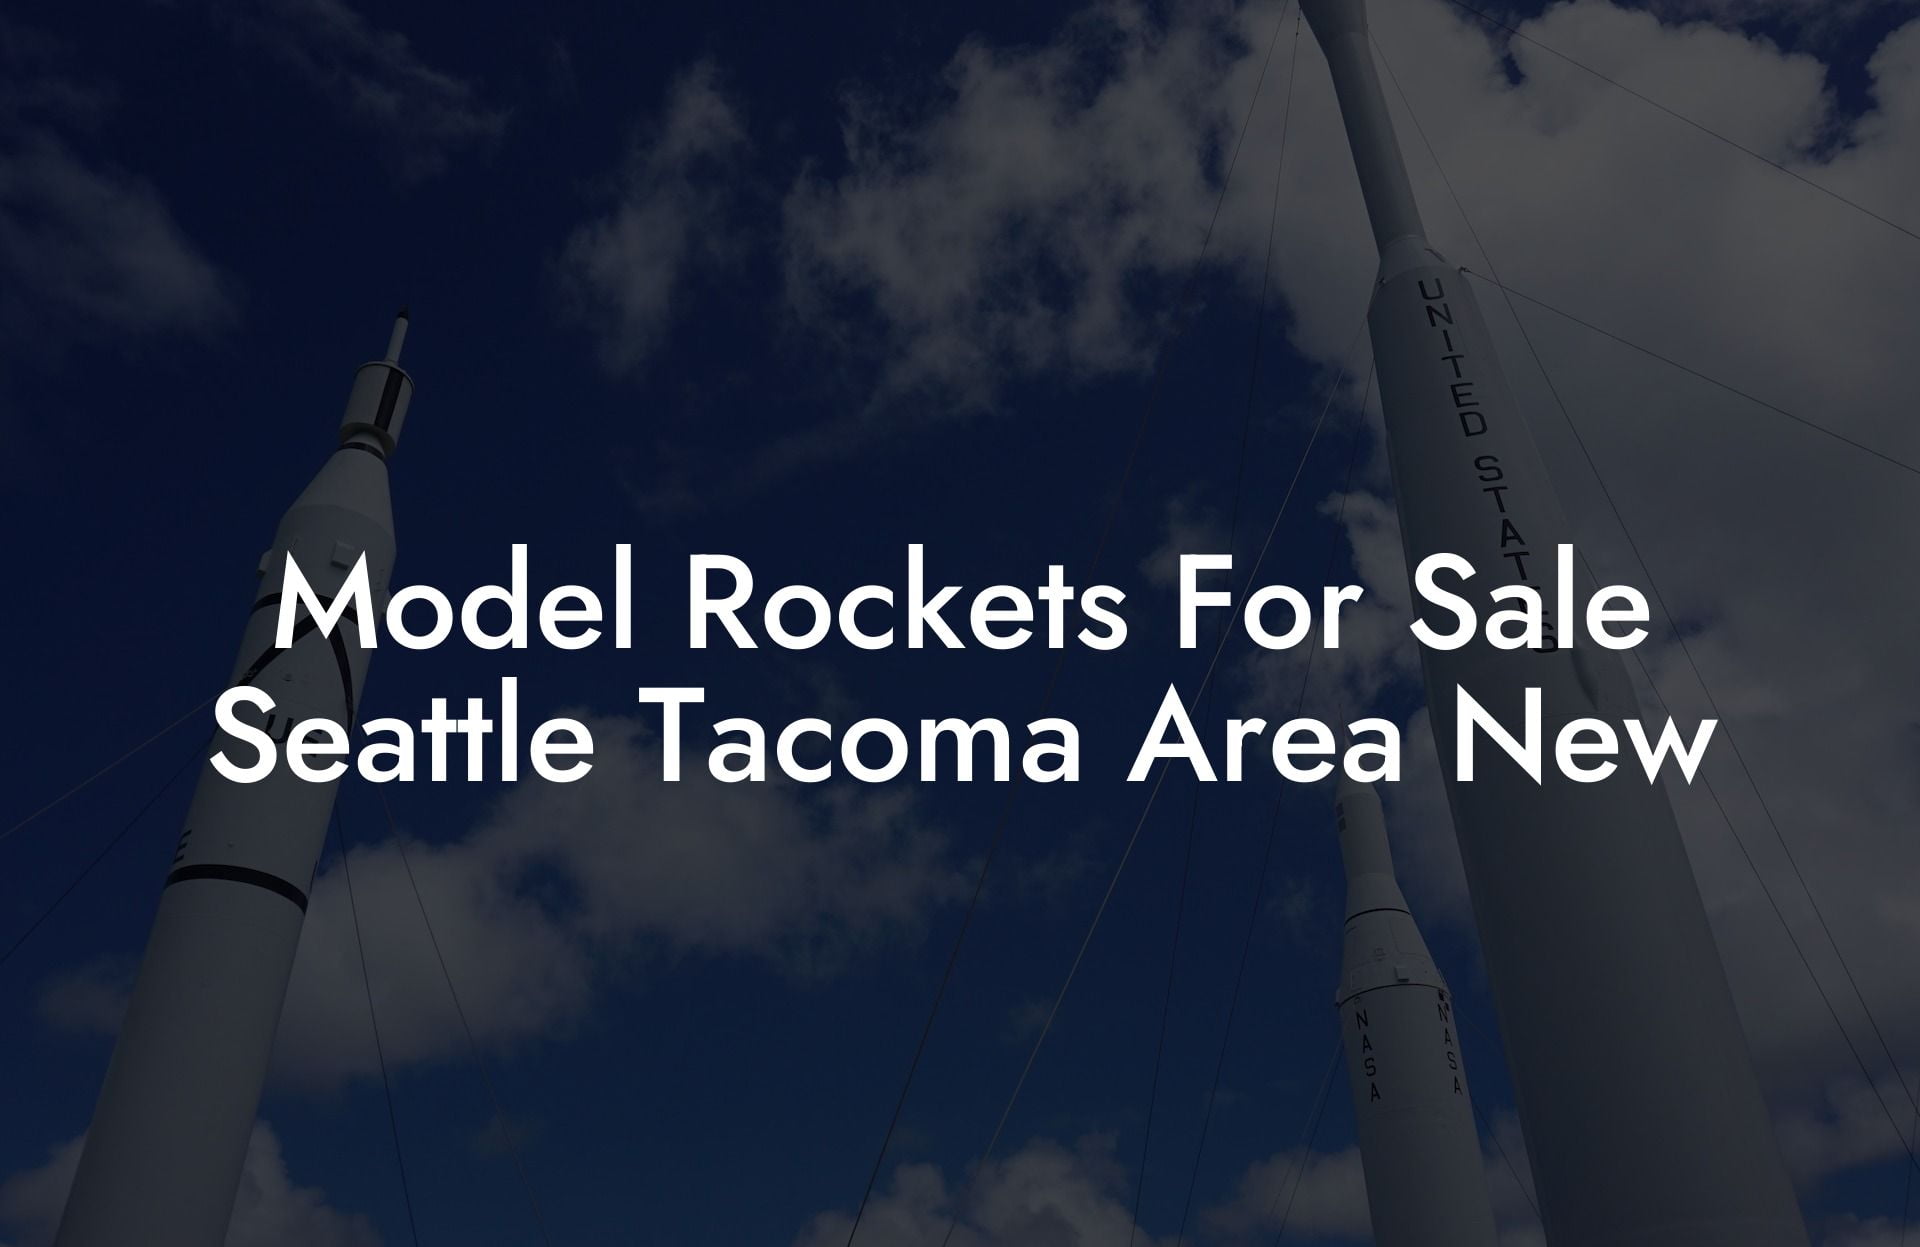 Model Rockets For Sale Seattle Tacoma Area New